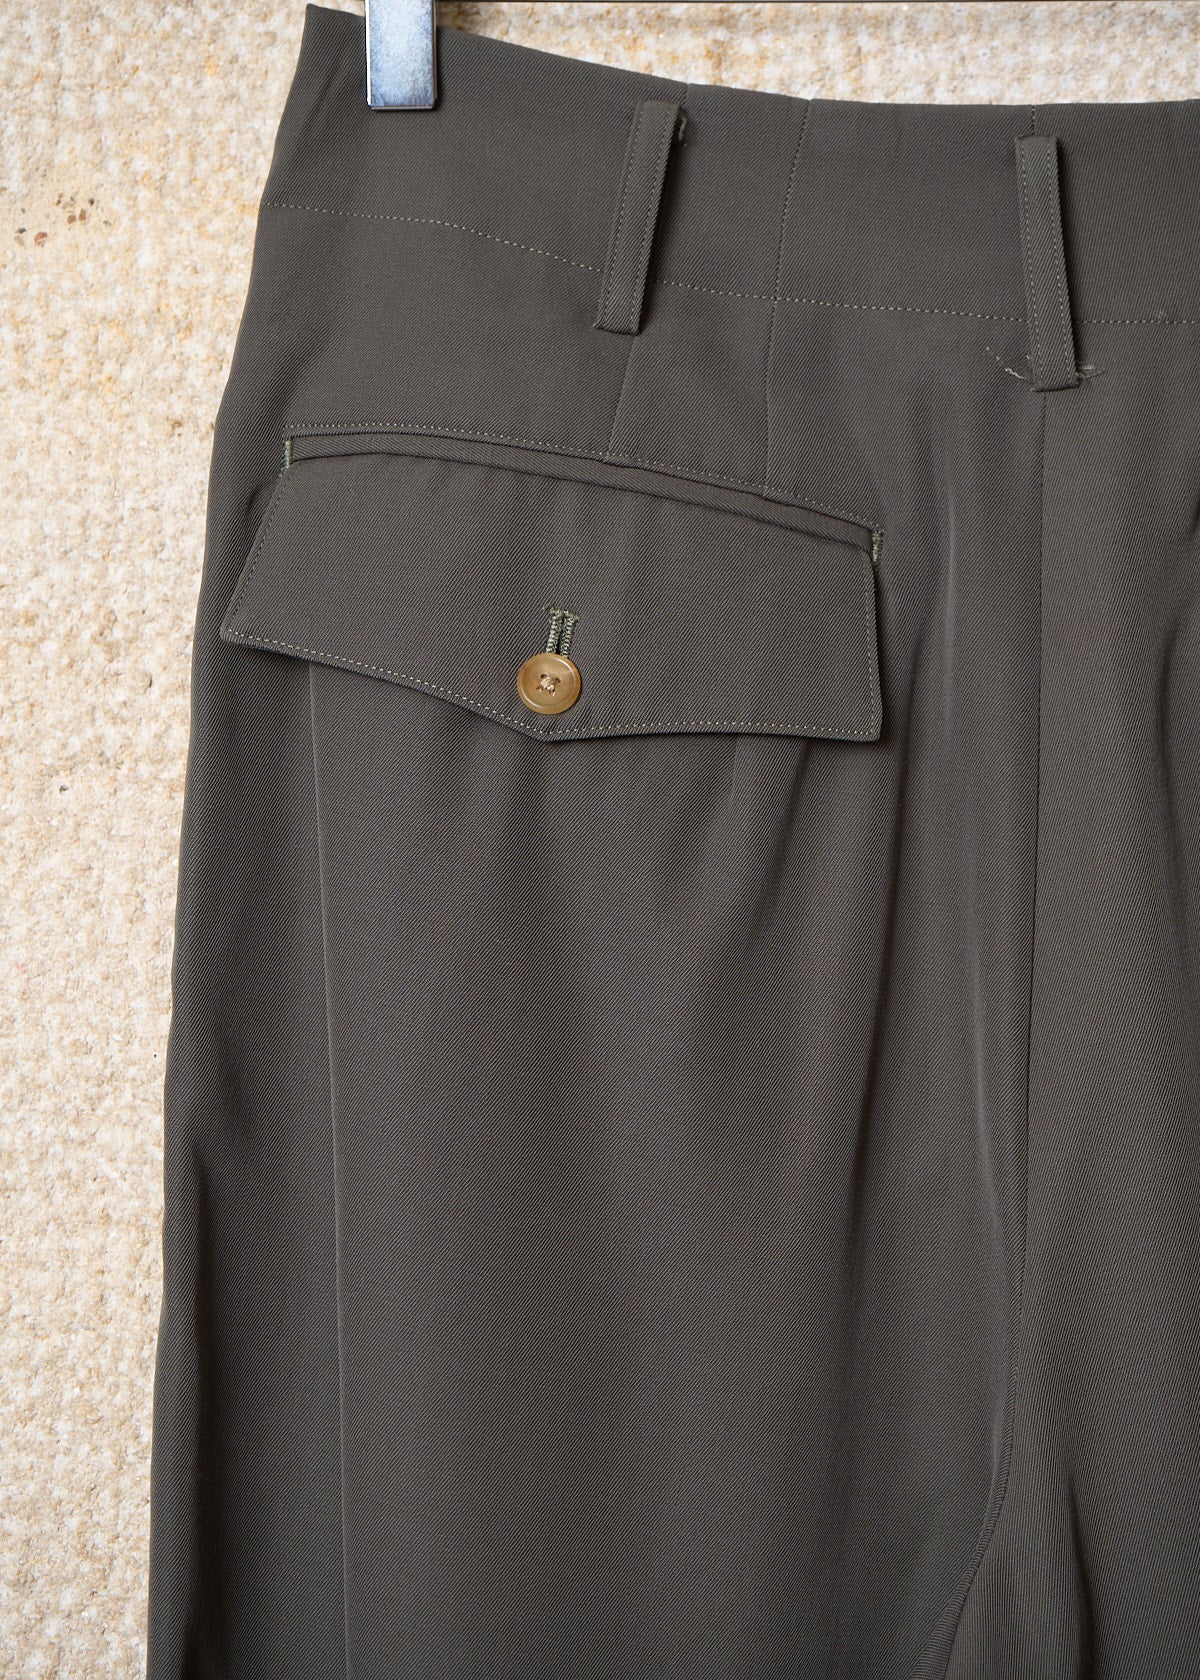 Pour Homme Olive Green Pleated Tropical Wool Pants 1990's - Medium